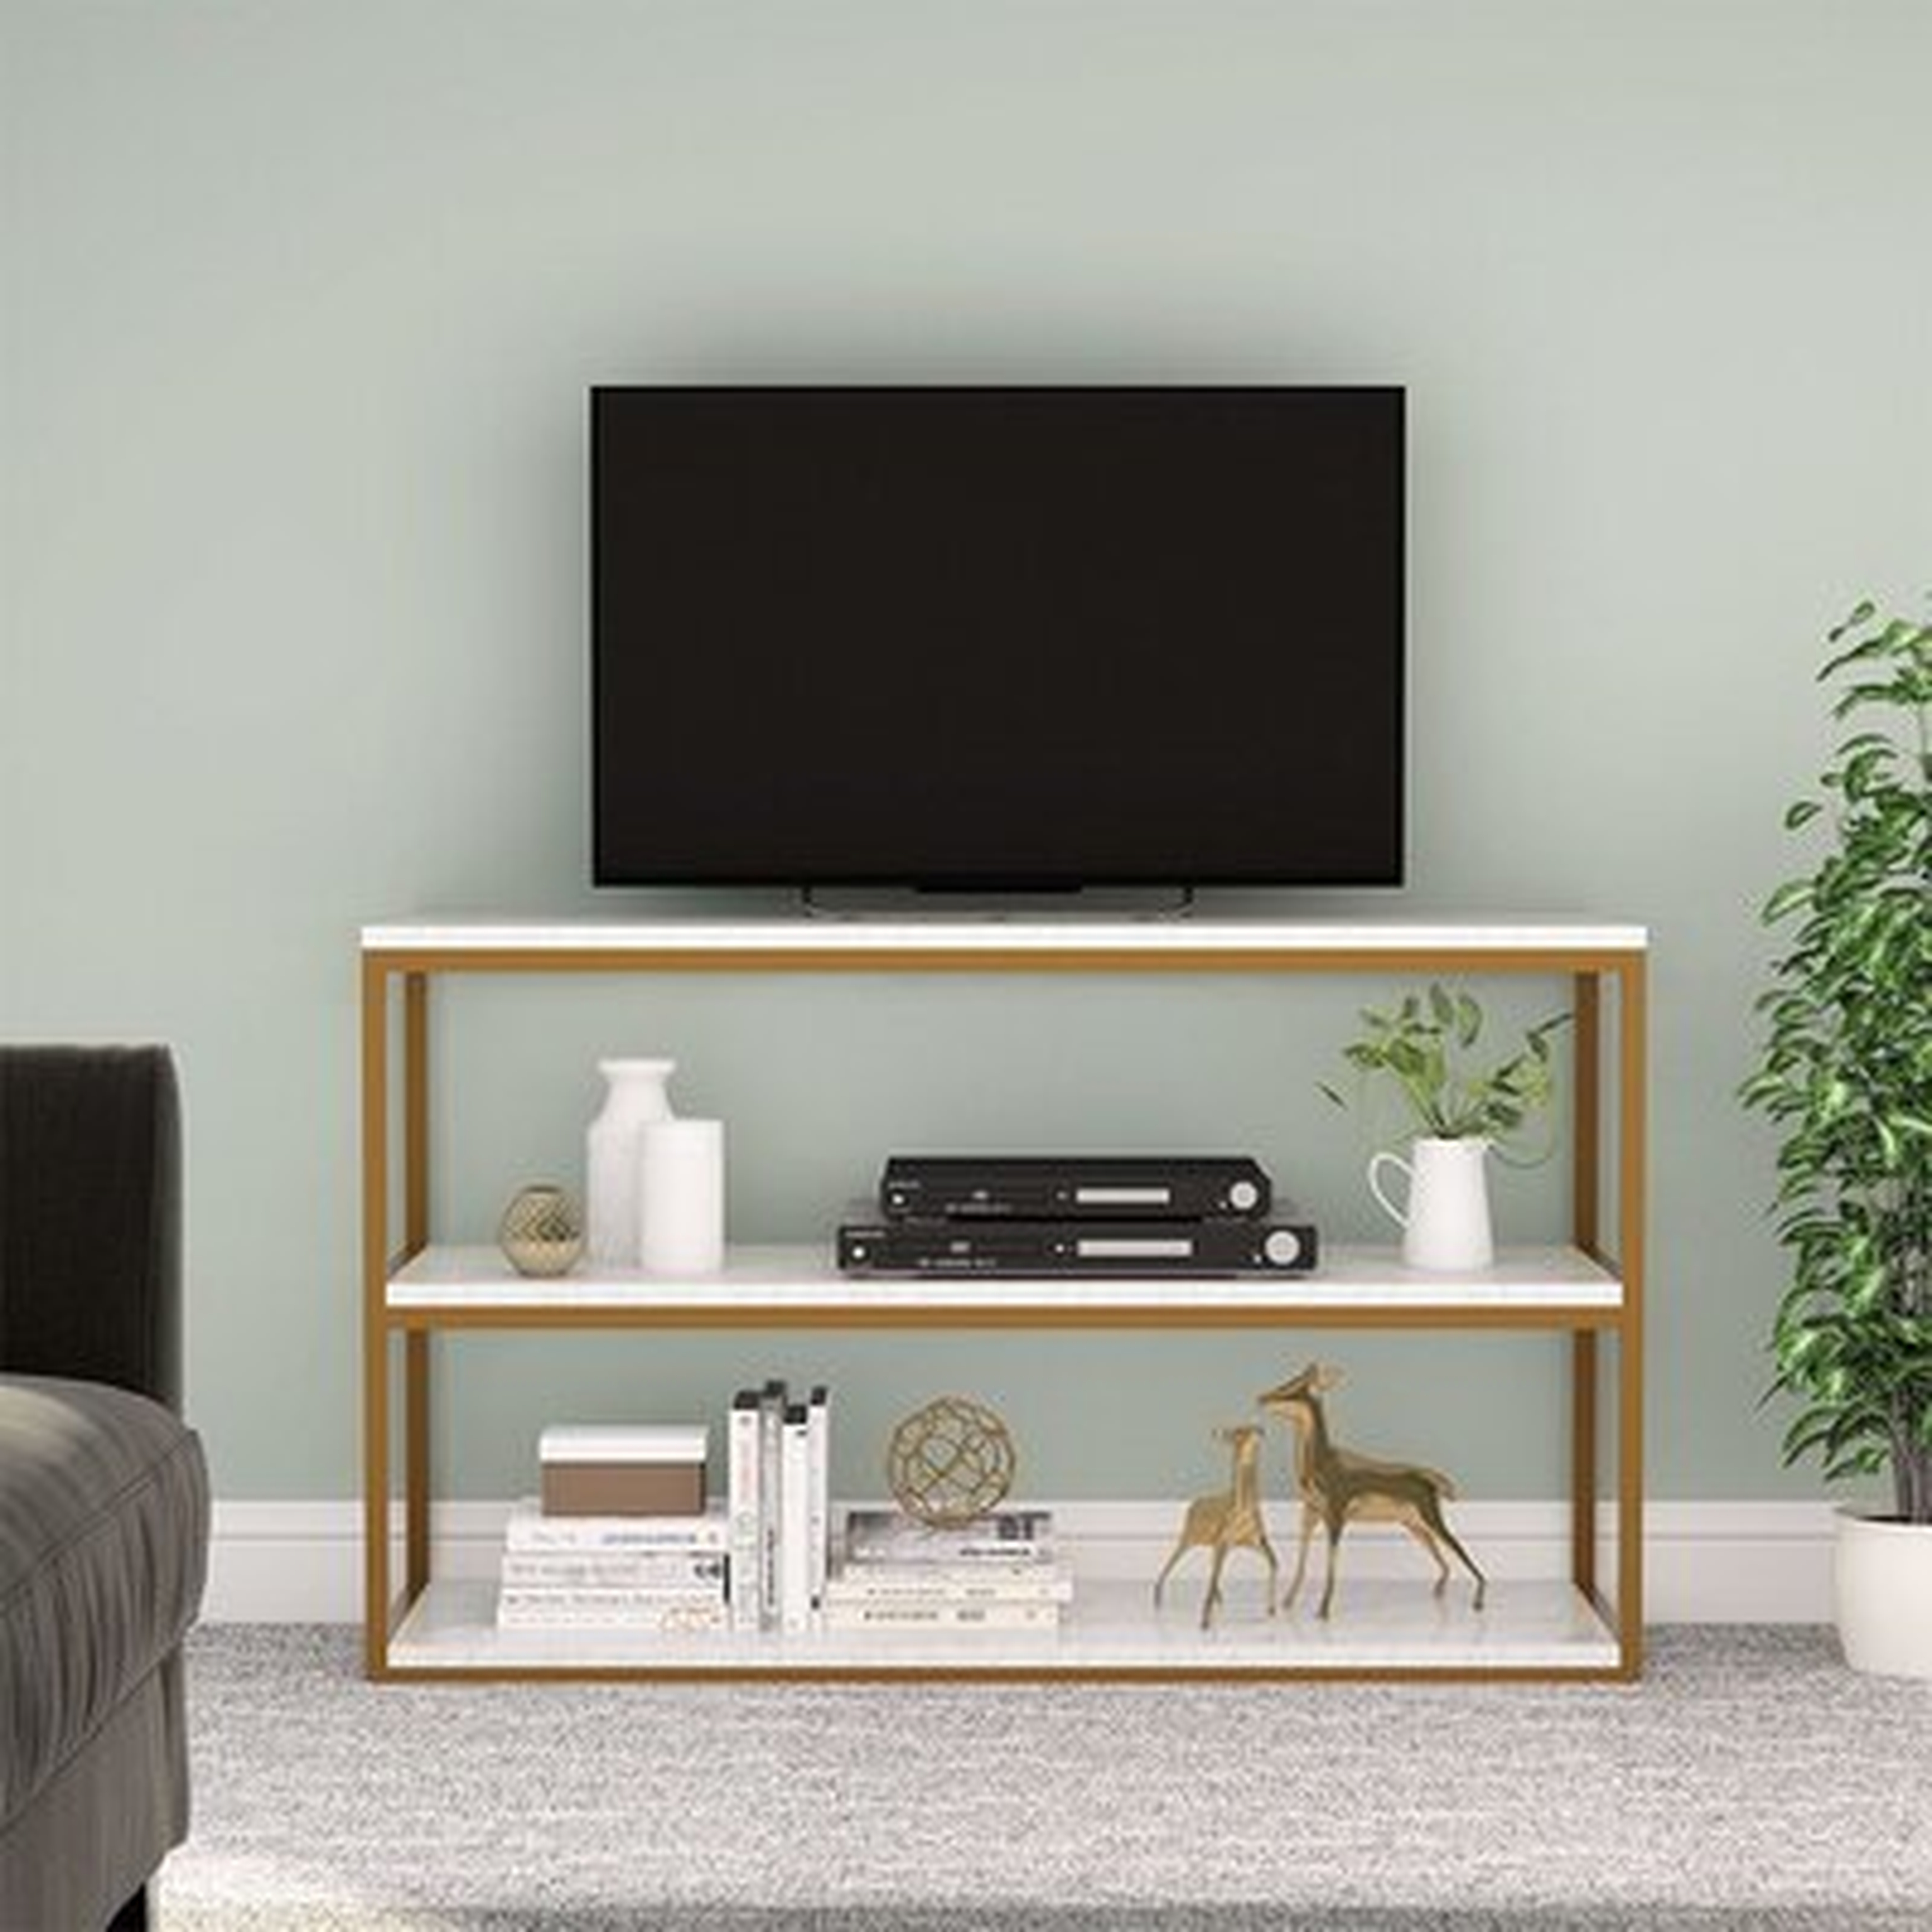 Tucci TV Stand for TVs up to 32" - Wayfair